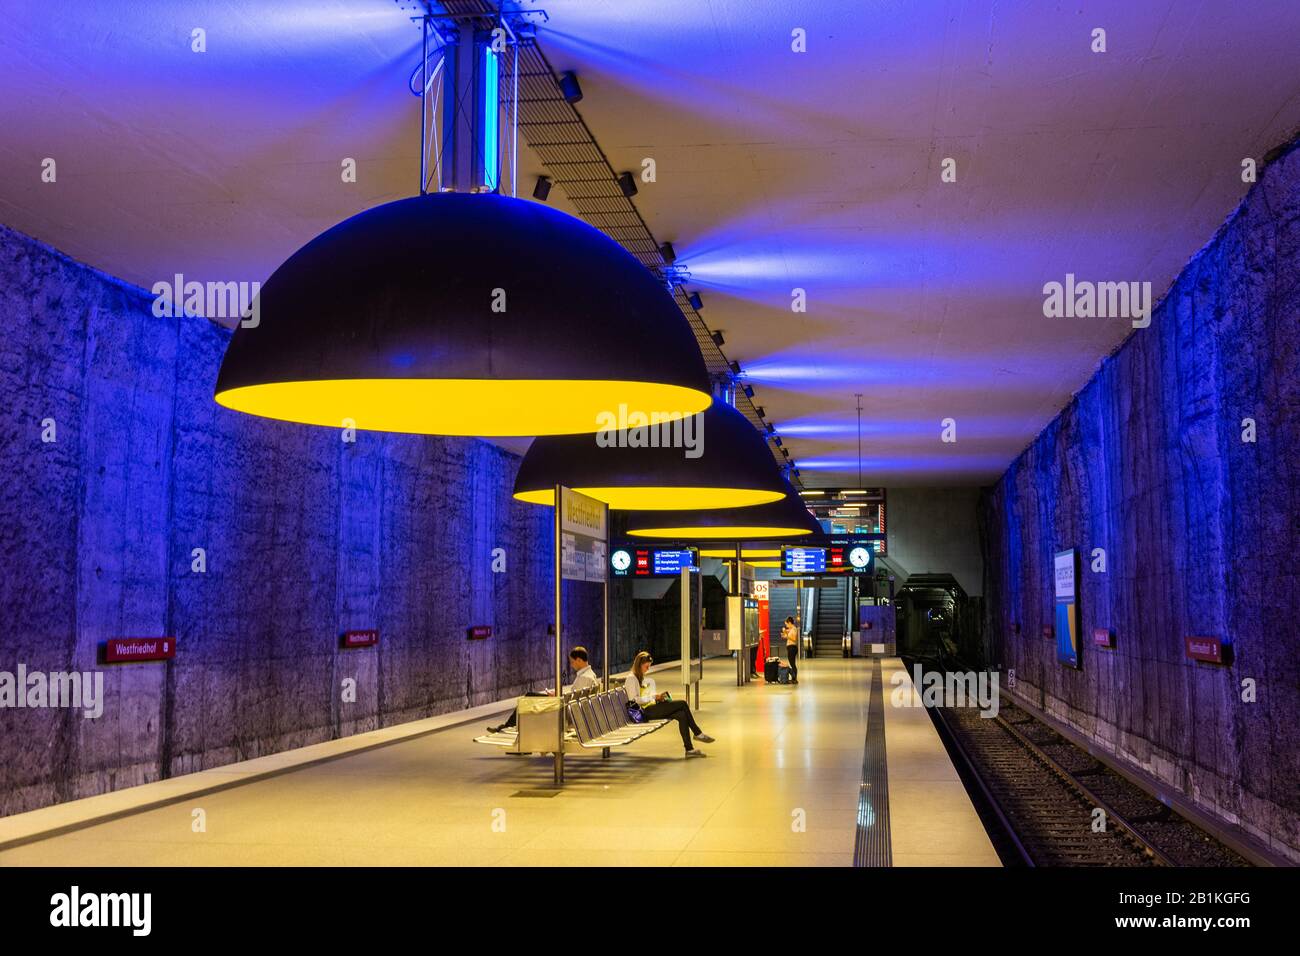 Munich, Germany – July 1, 2016. Interior view of Westfriedhof U-Bahn station on the U1 line of the Munich U-Bahn system, with people and information b Stock Photo